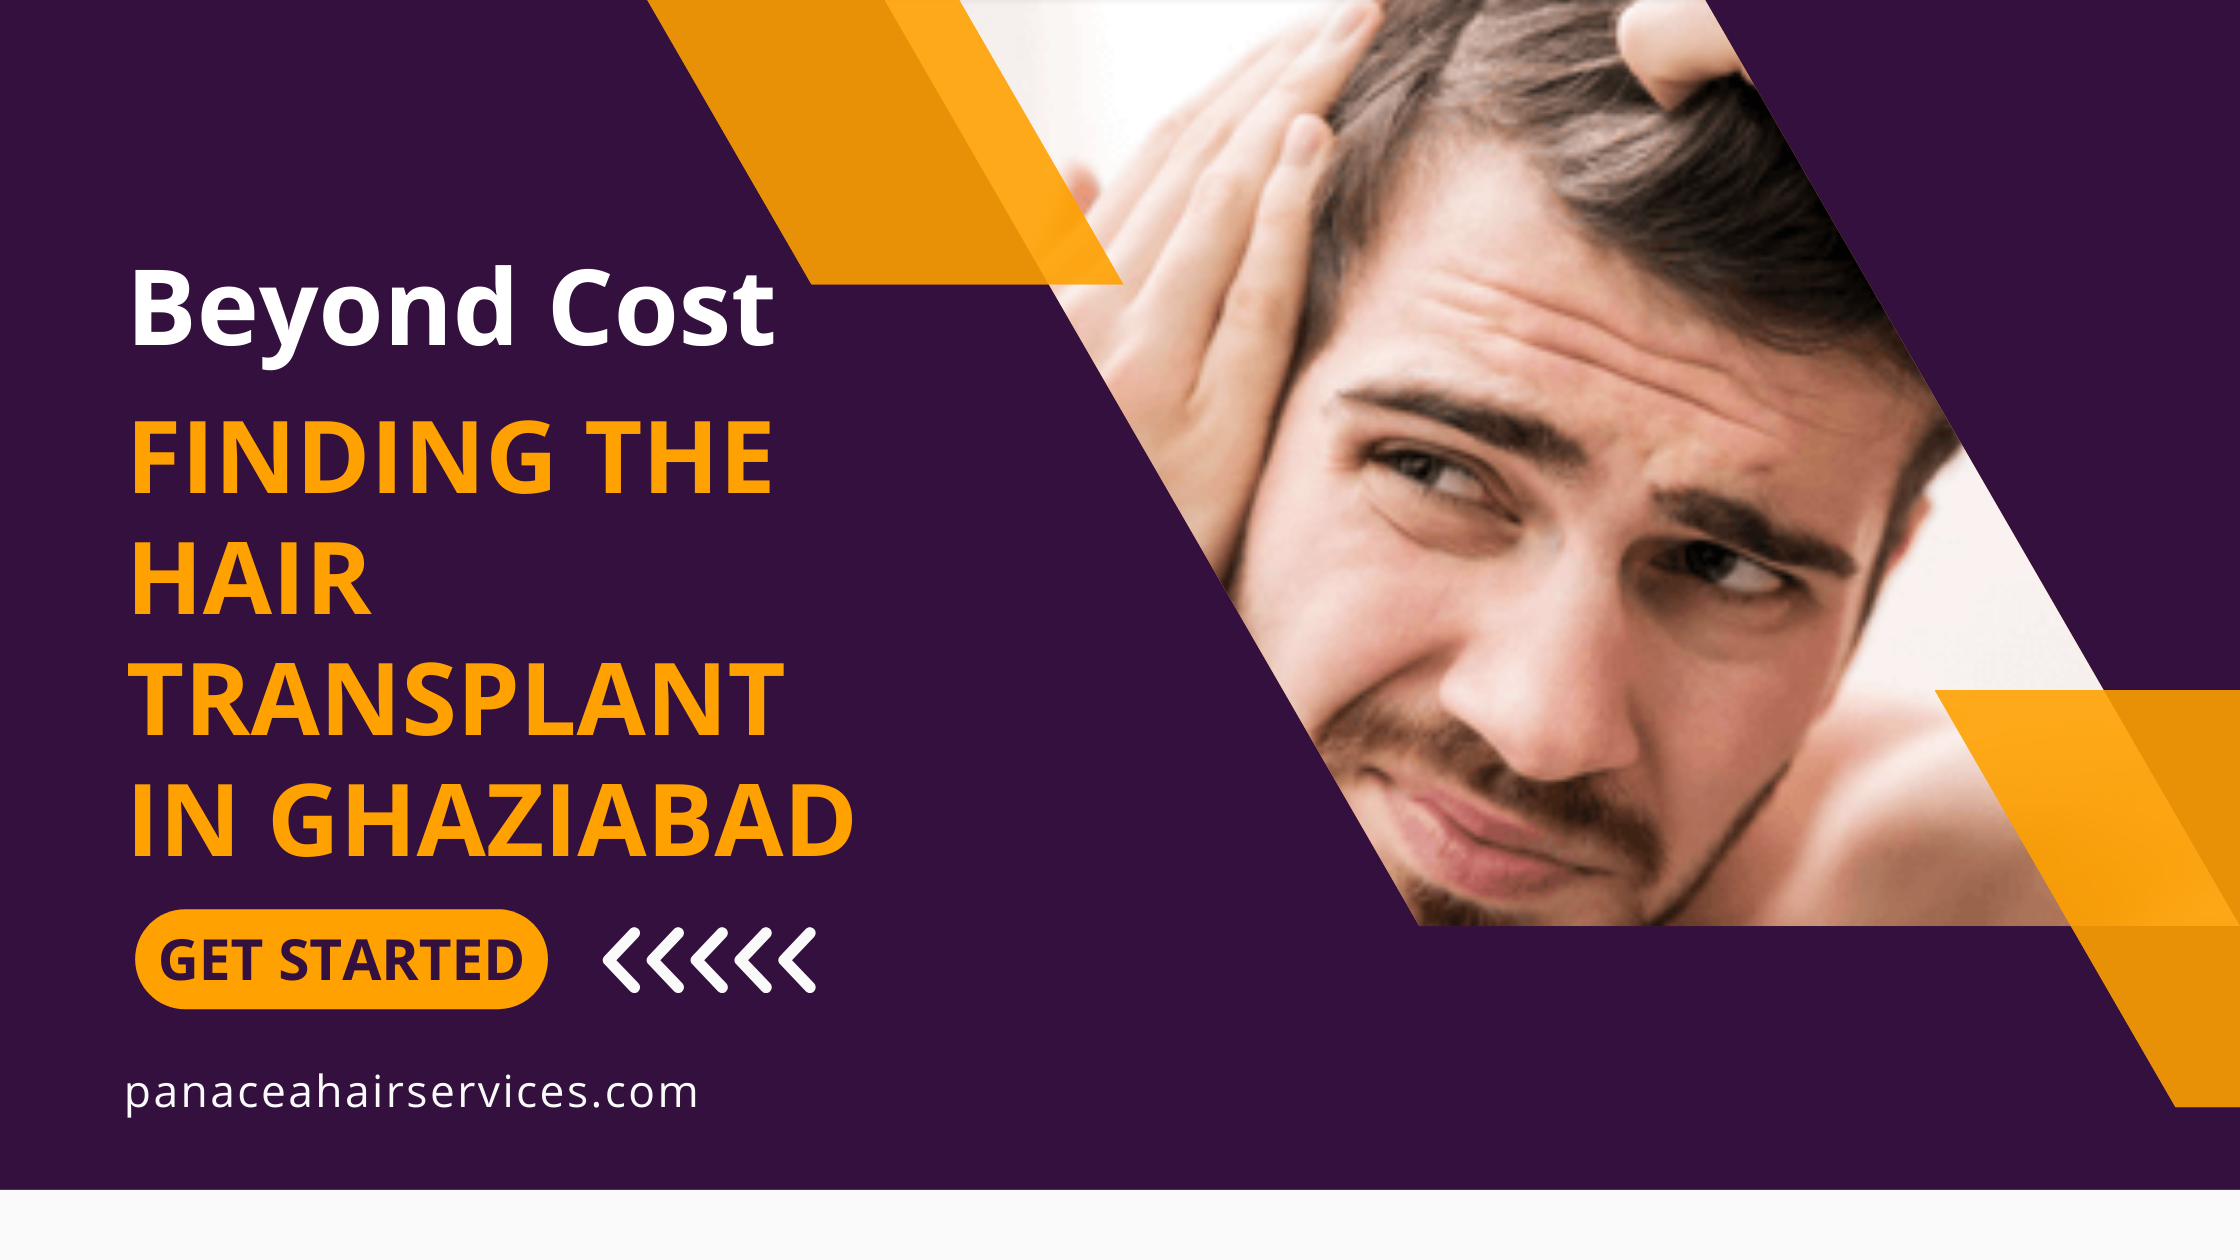 Beyond Cost Finding the Hair Transplant in Ghaziabad